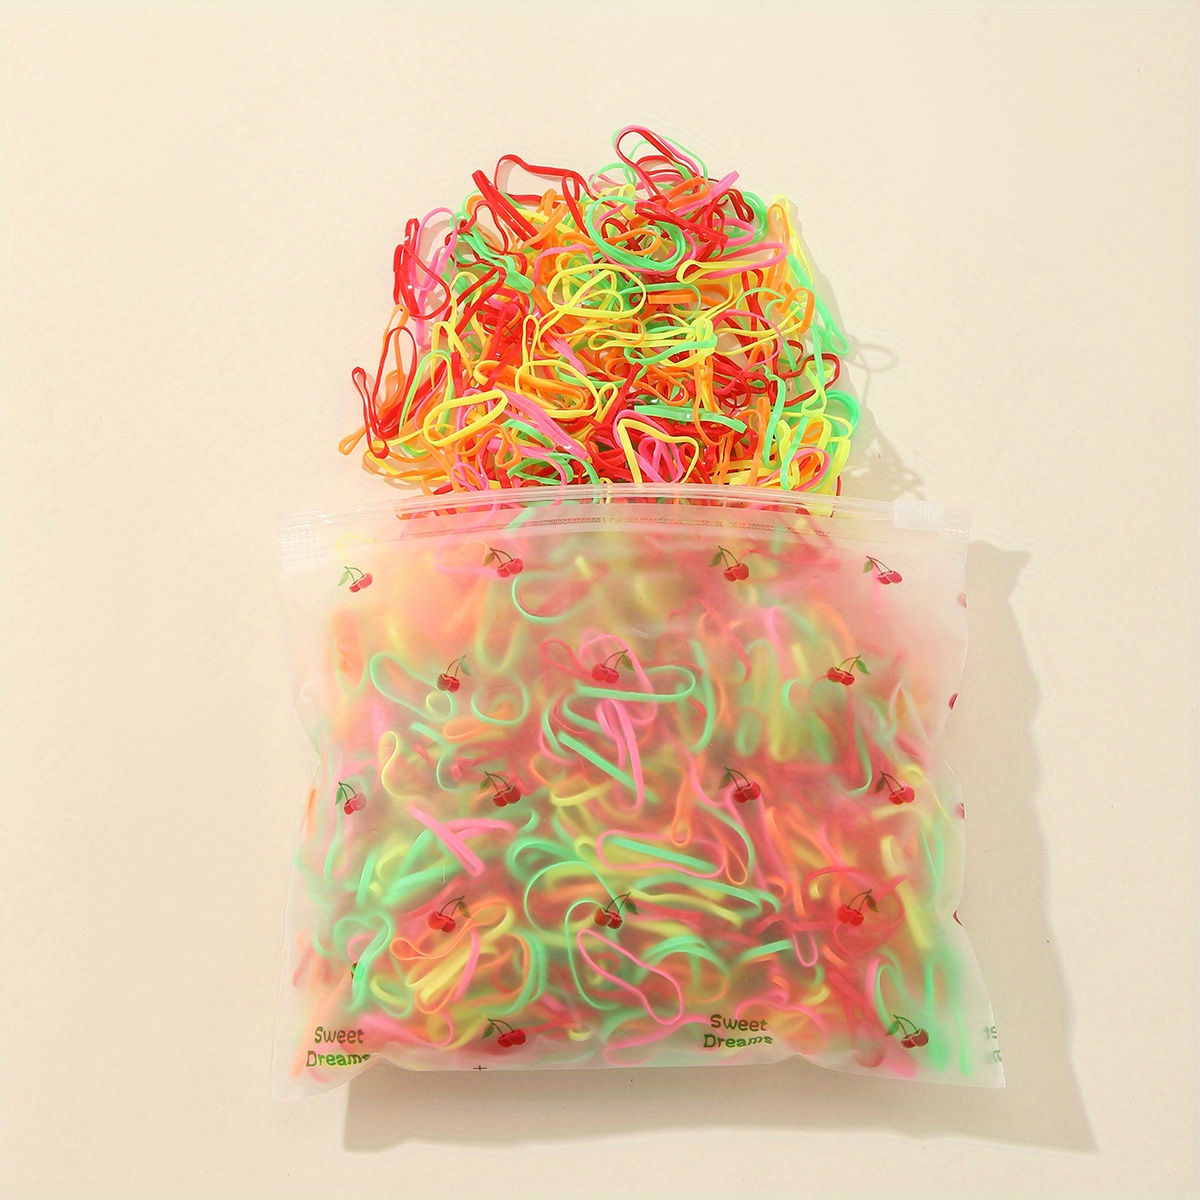 Temu 1000pcs/ Pack Girl Colorful Fashion Disposable Rubber Band Elastic Hair Band Headwear Baby Accessories,$0.99,free returns&free ship,synthetic